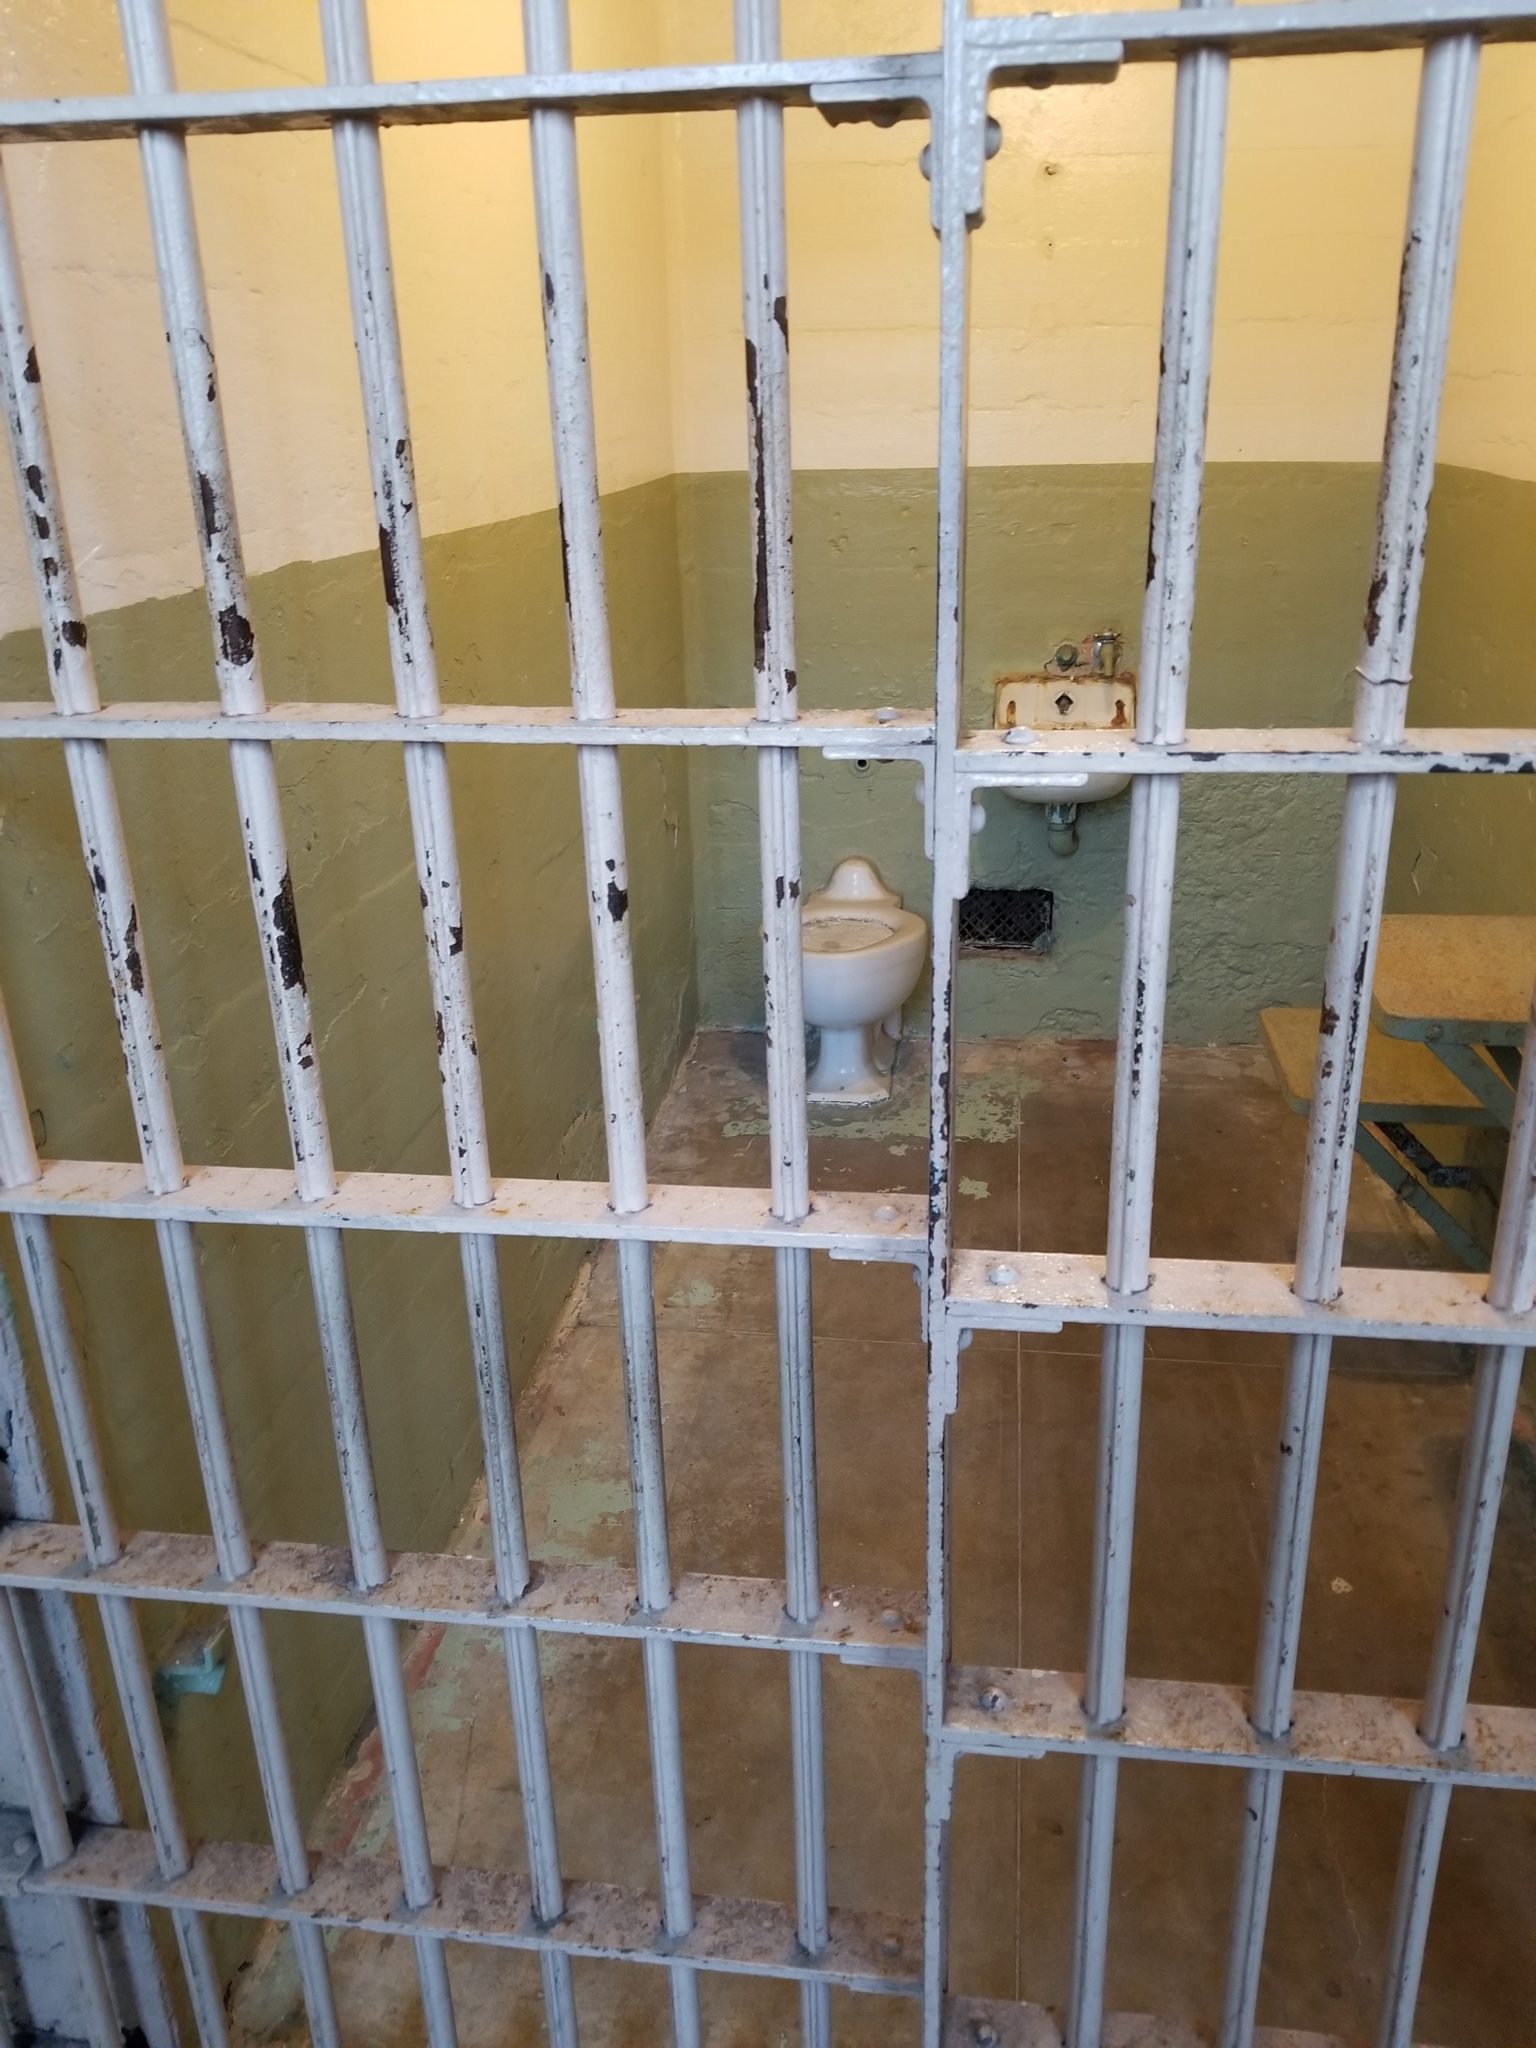 a prison cell with bars